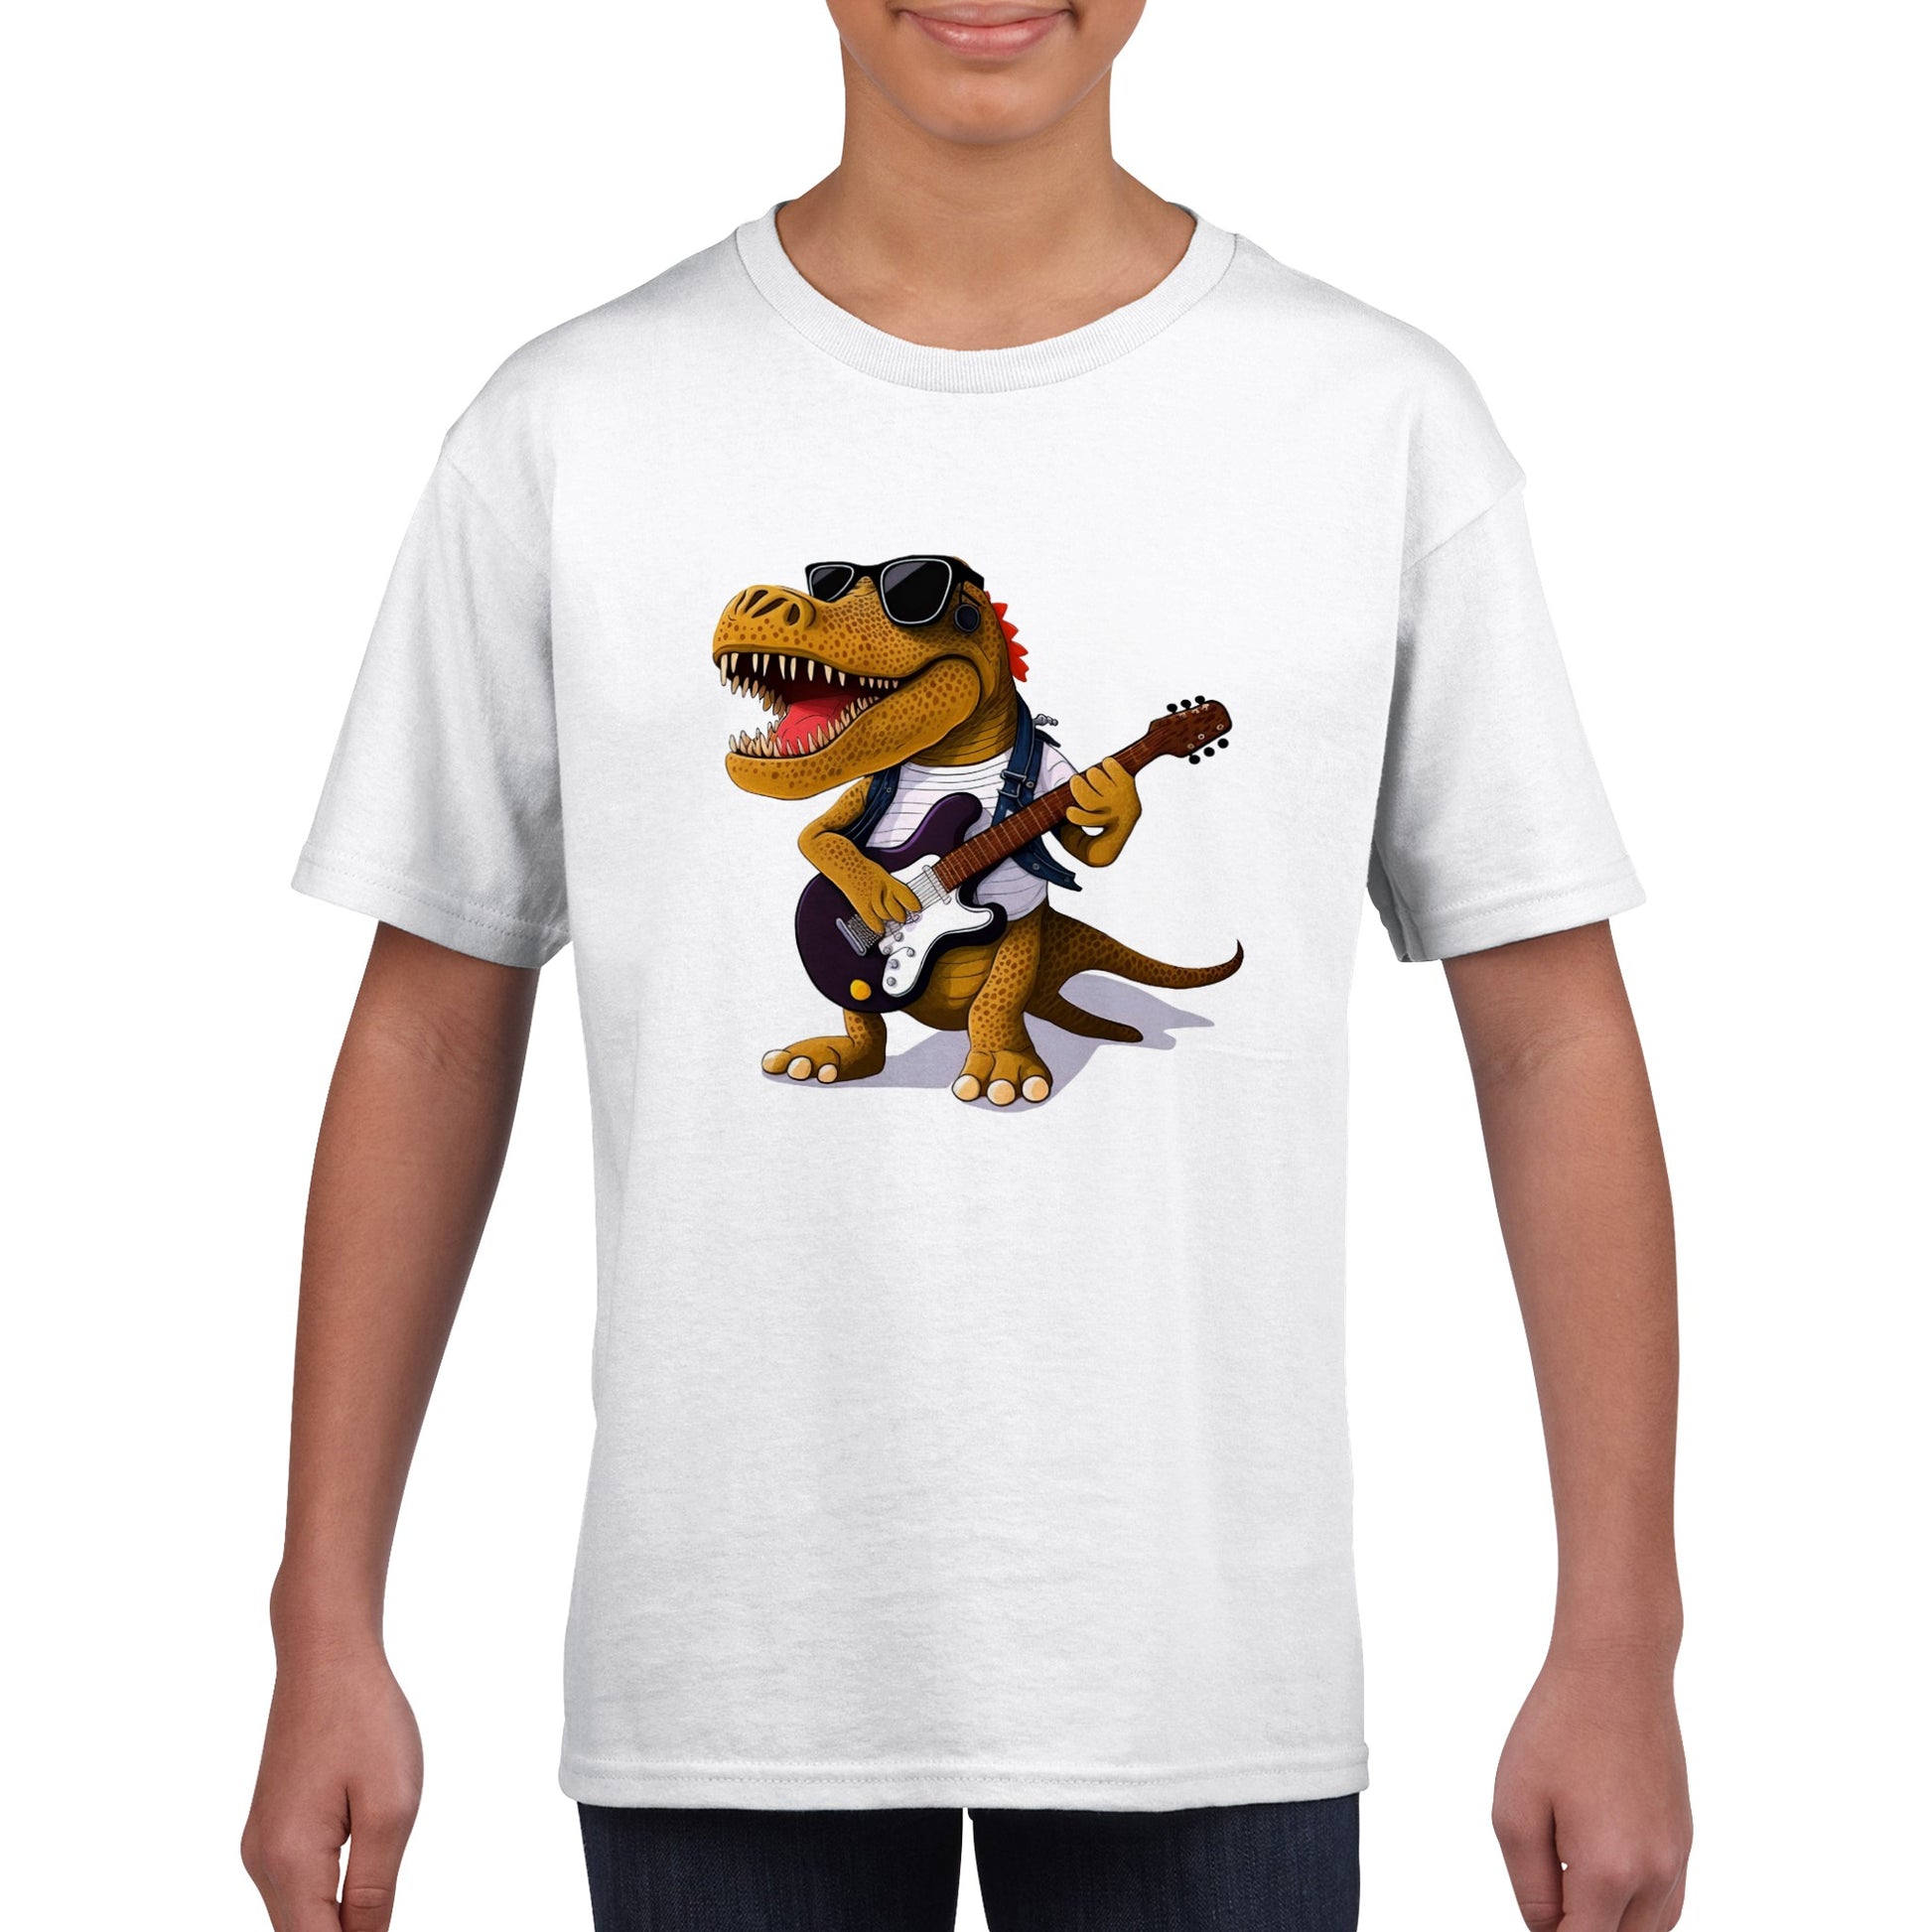 Boy wearing a white t-shirt with a rockstar dino playing the guitar print